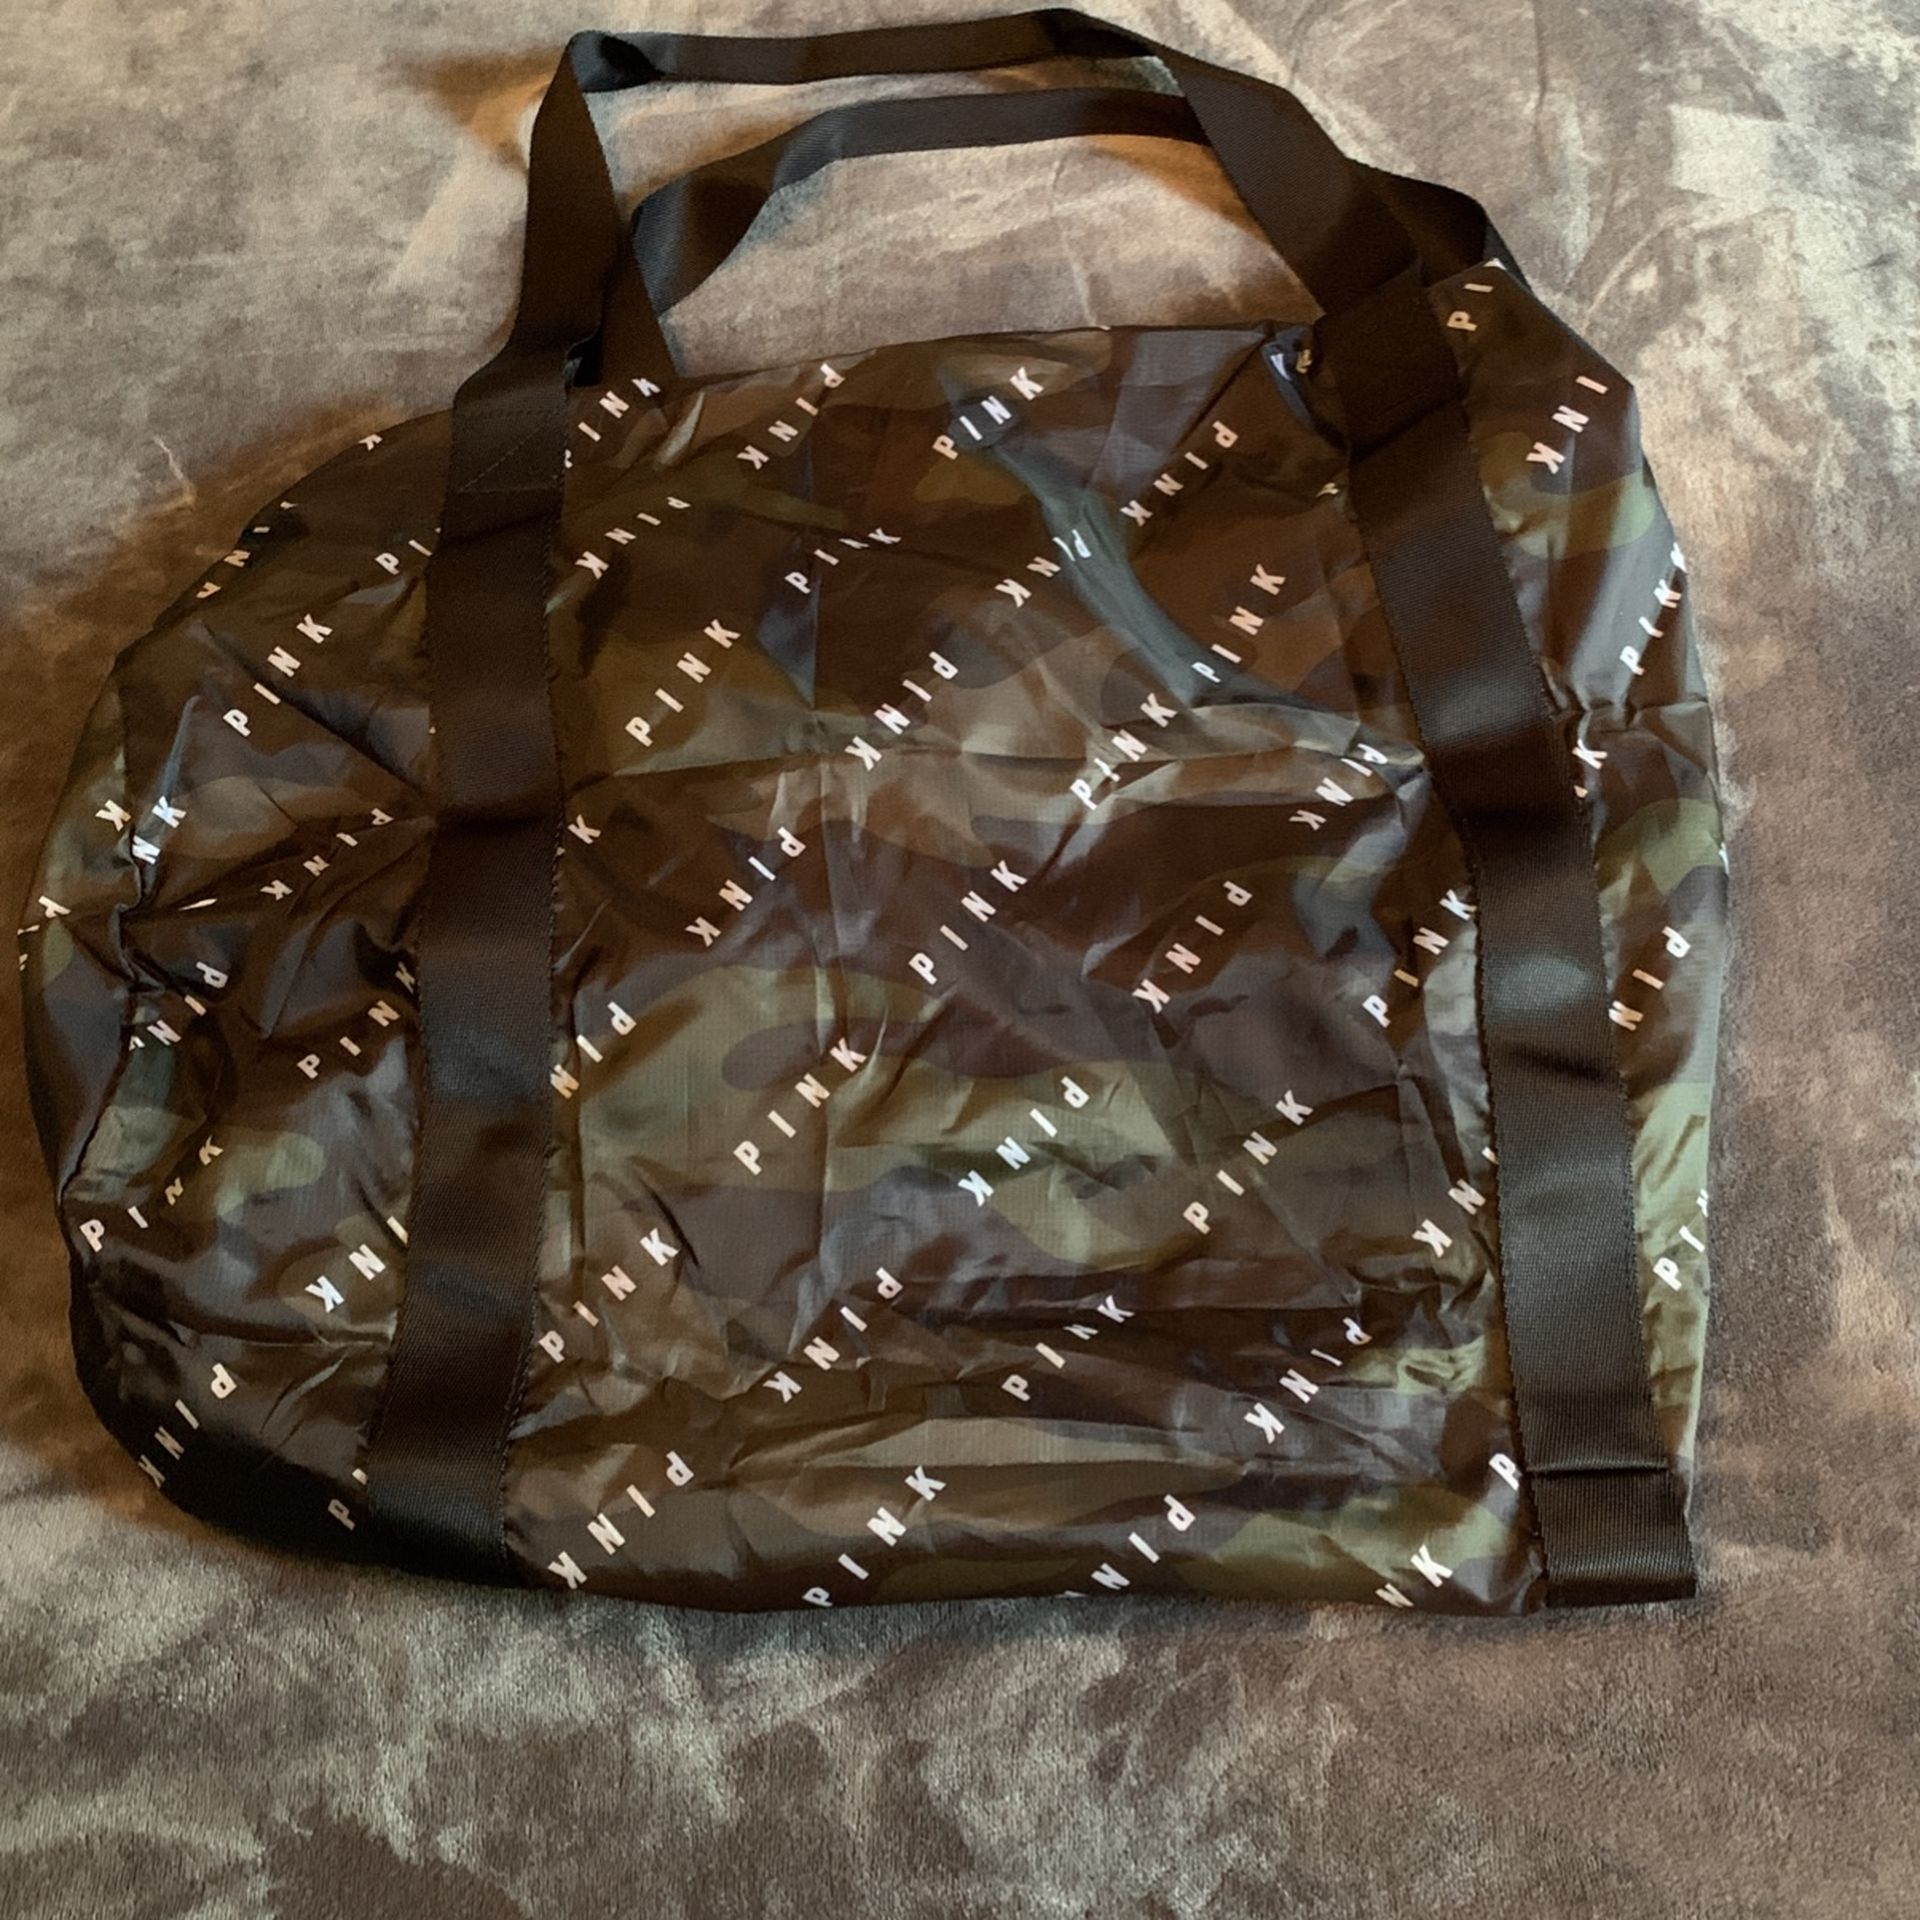 Pink Camouflage Duffle Bag